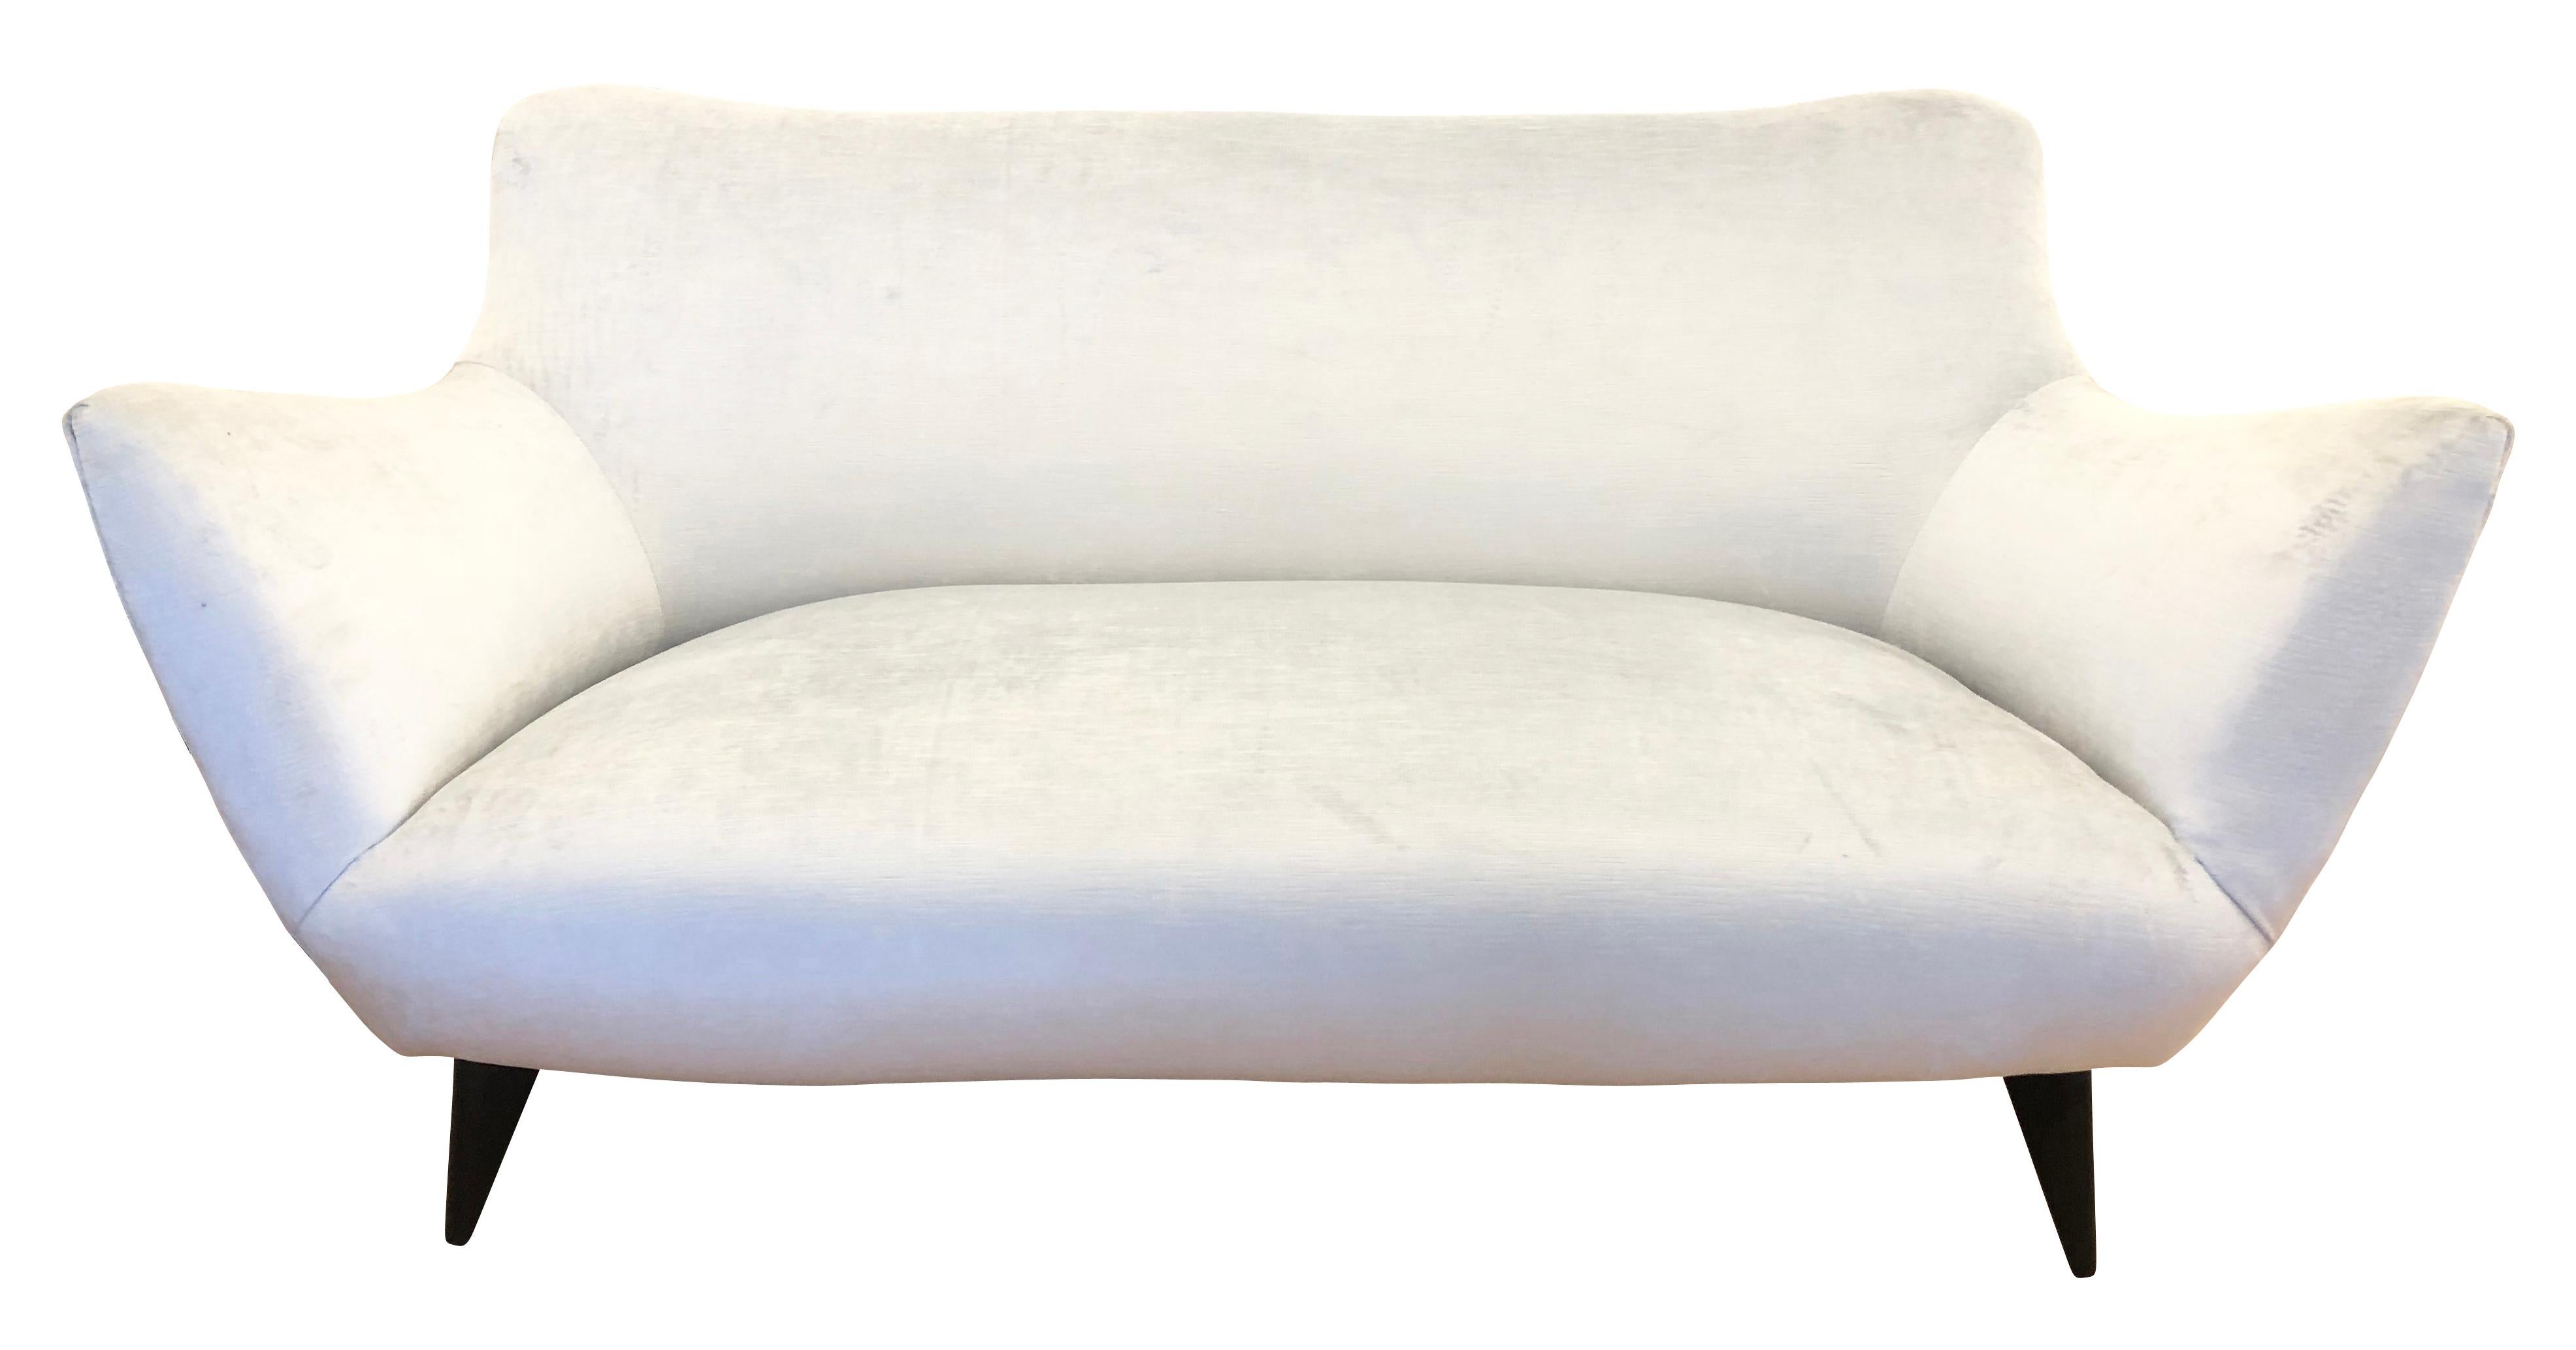 Beautifully designed and balanced “Perla” sofa by Guglielmo Veronesi for ISA from the 1950s. Its curved lines and tapered wooden legs give it a sensual and modern feel. Has been re-upholstered in a light blue velvet.

Condition: Excellent vintage